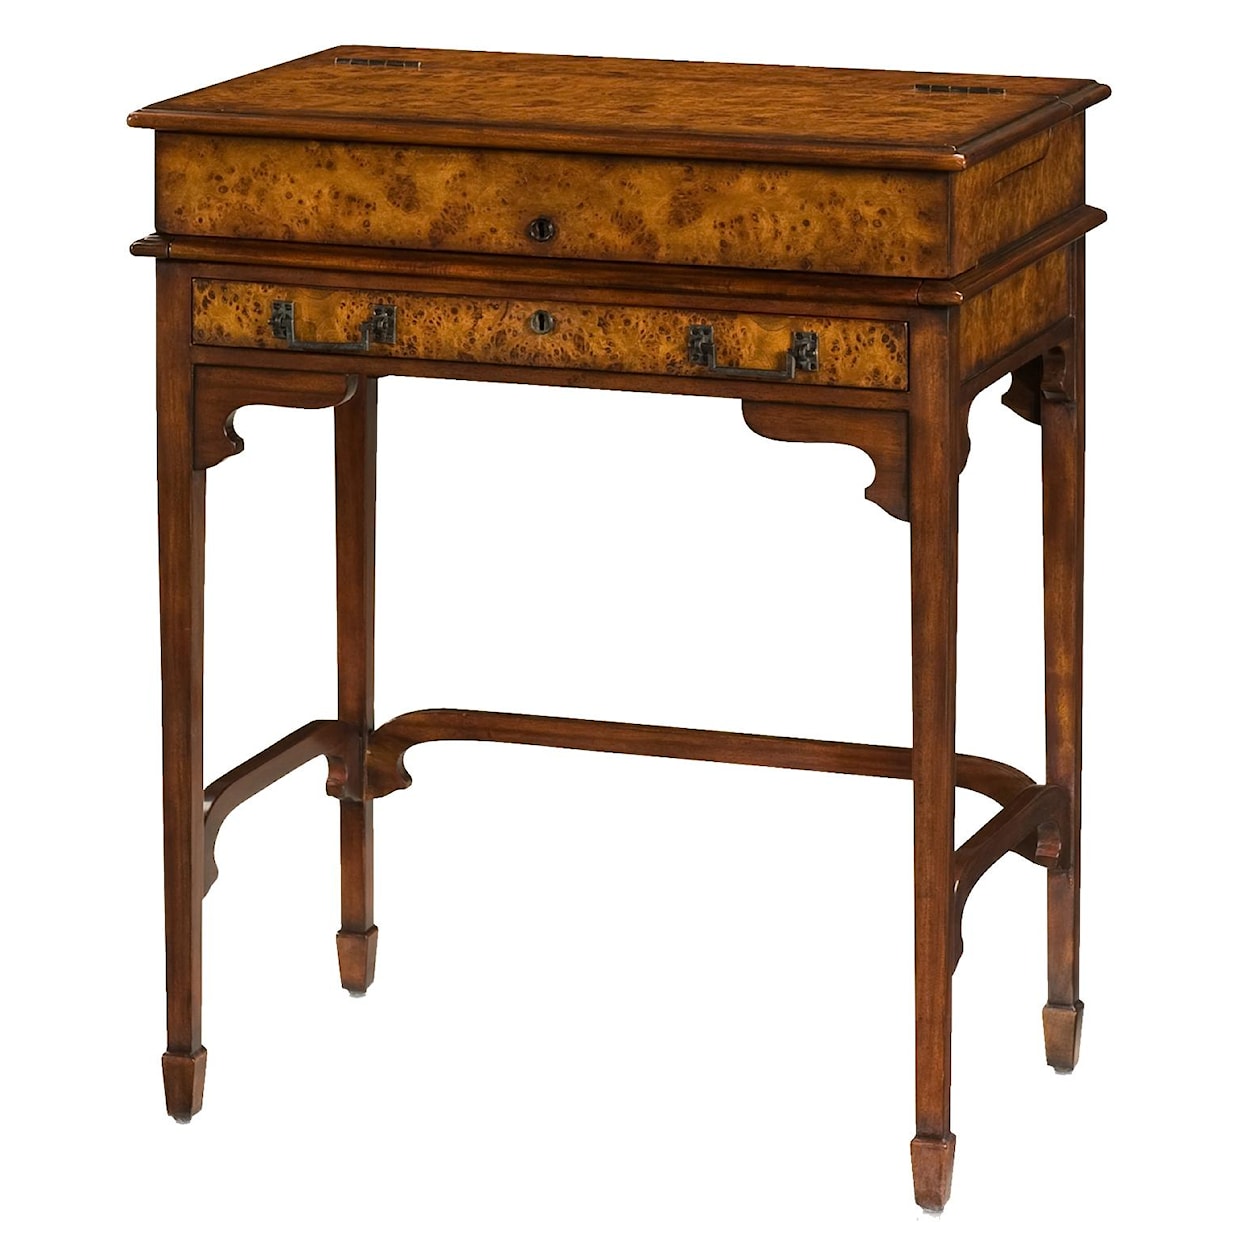 Theodore Alexander Campaign Lift Top Table Desk